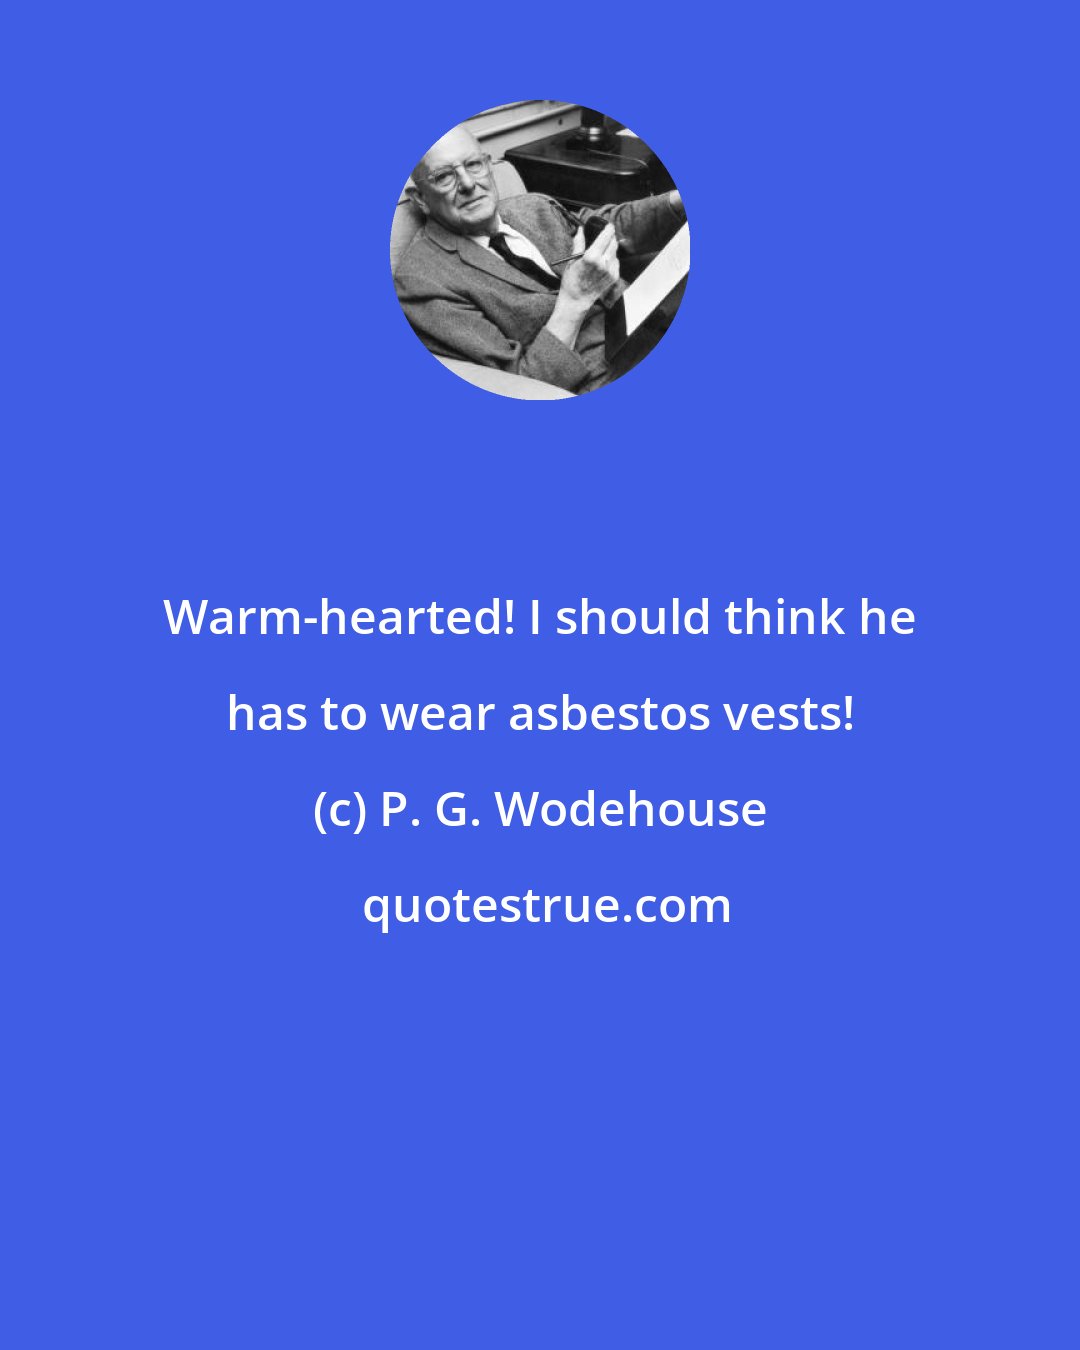 P. G. Wodehouse: Warm-hearted! I should think he has to wear asbestos vests!